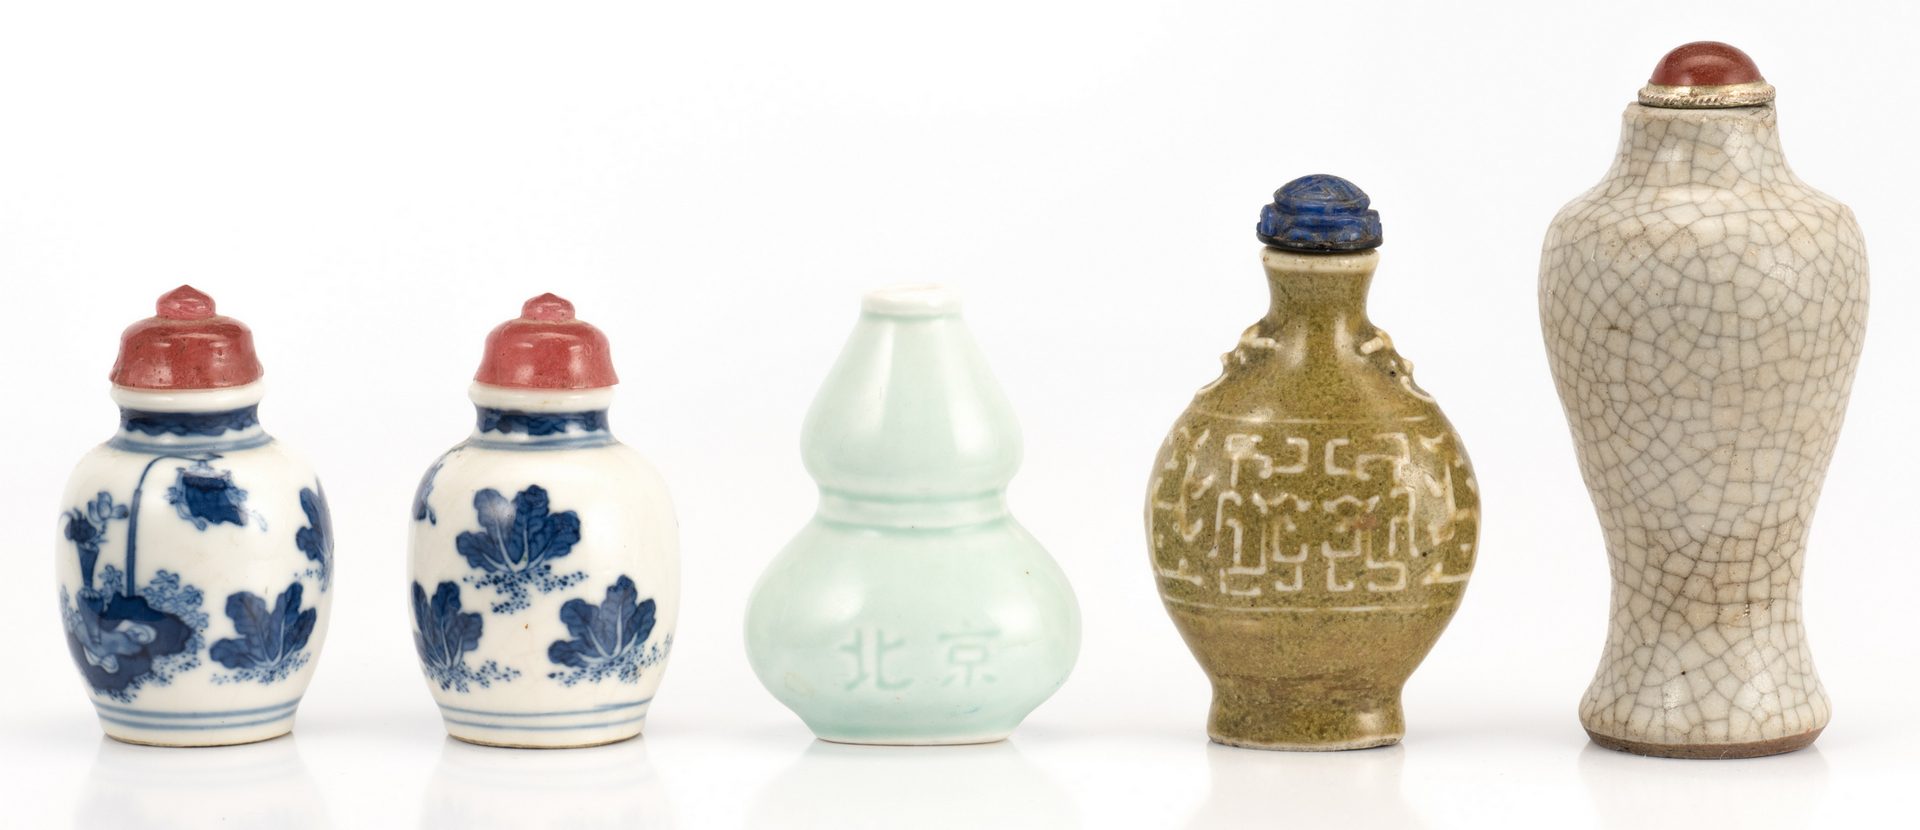 Lot 9: Collection of 5 Ceramic Snuff Bottles